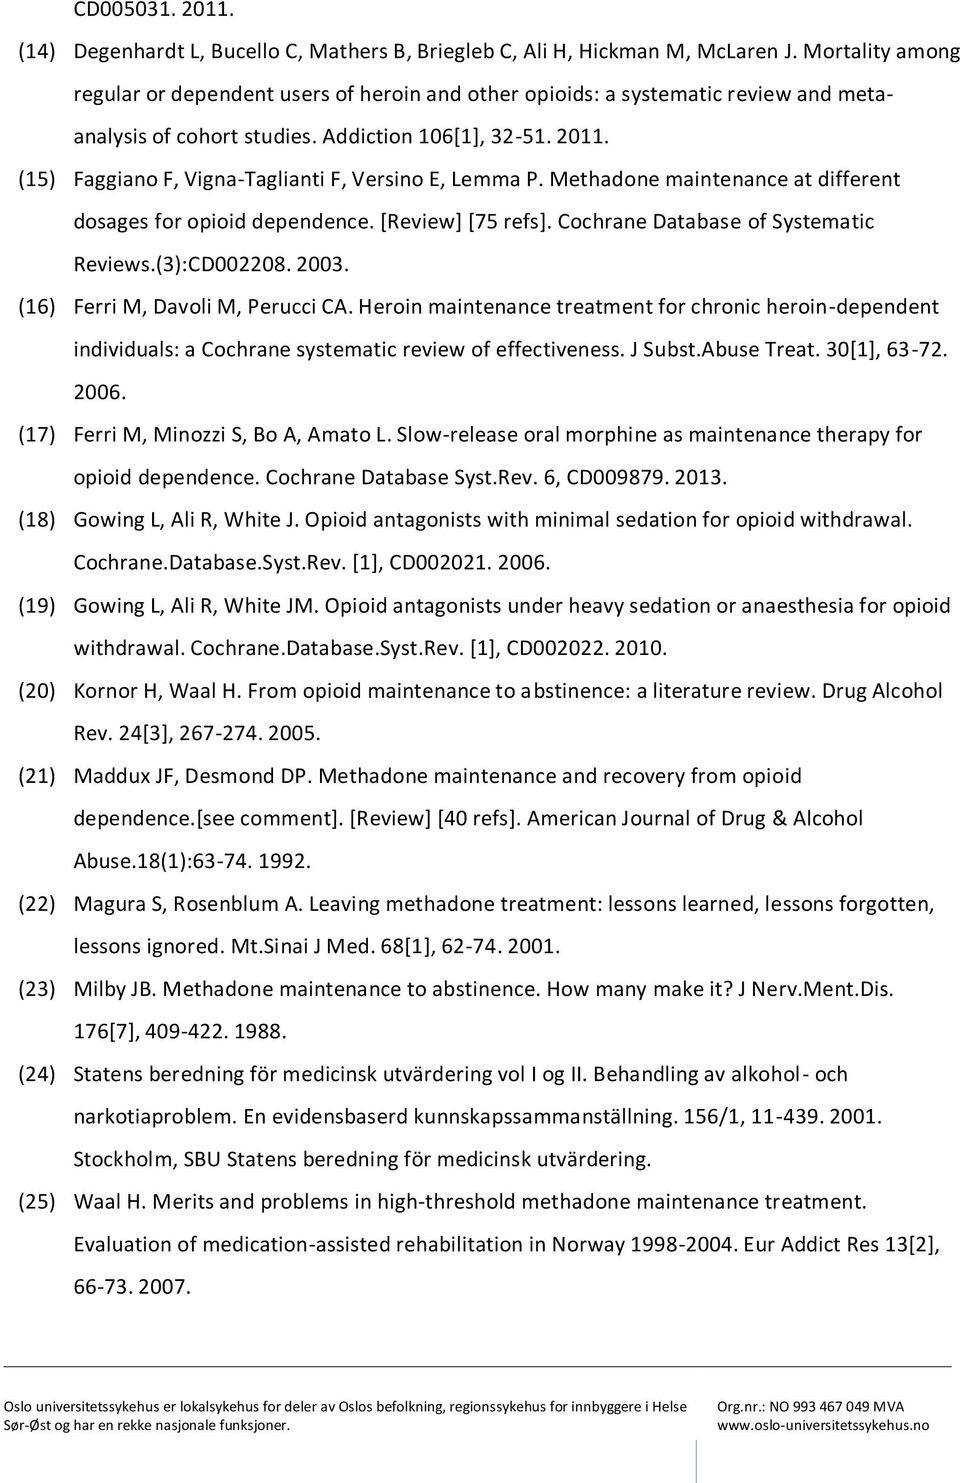 (15) Faggiano F, Vigna-Taglianti F, Versino E, Lemma P. Methadone maintenance at different dosages for opioid dependence. [Review] [75 refs]. Cochrane Database of Systematic Reviews.(3):CD002208.